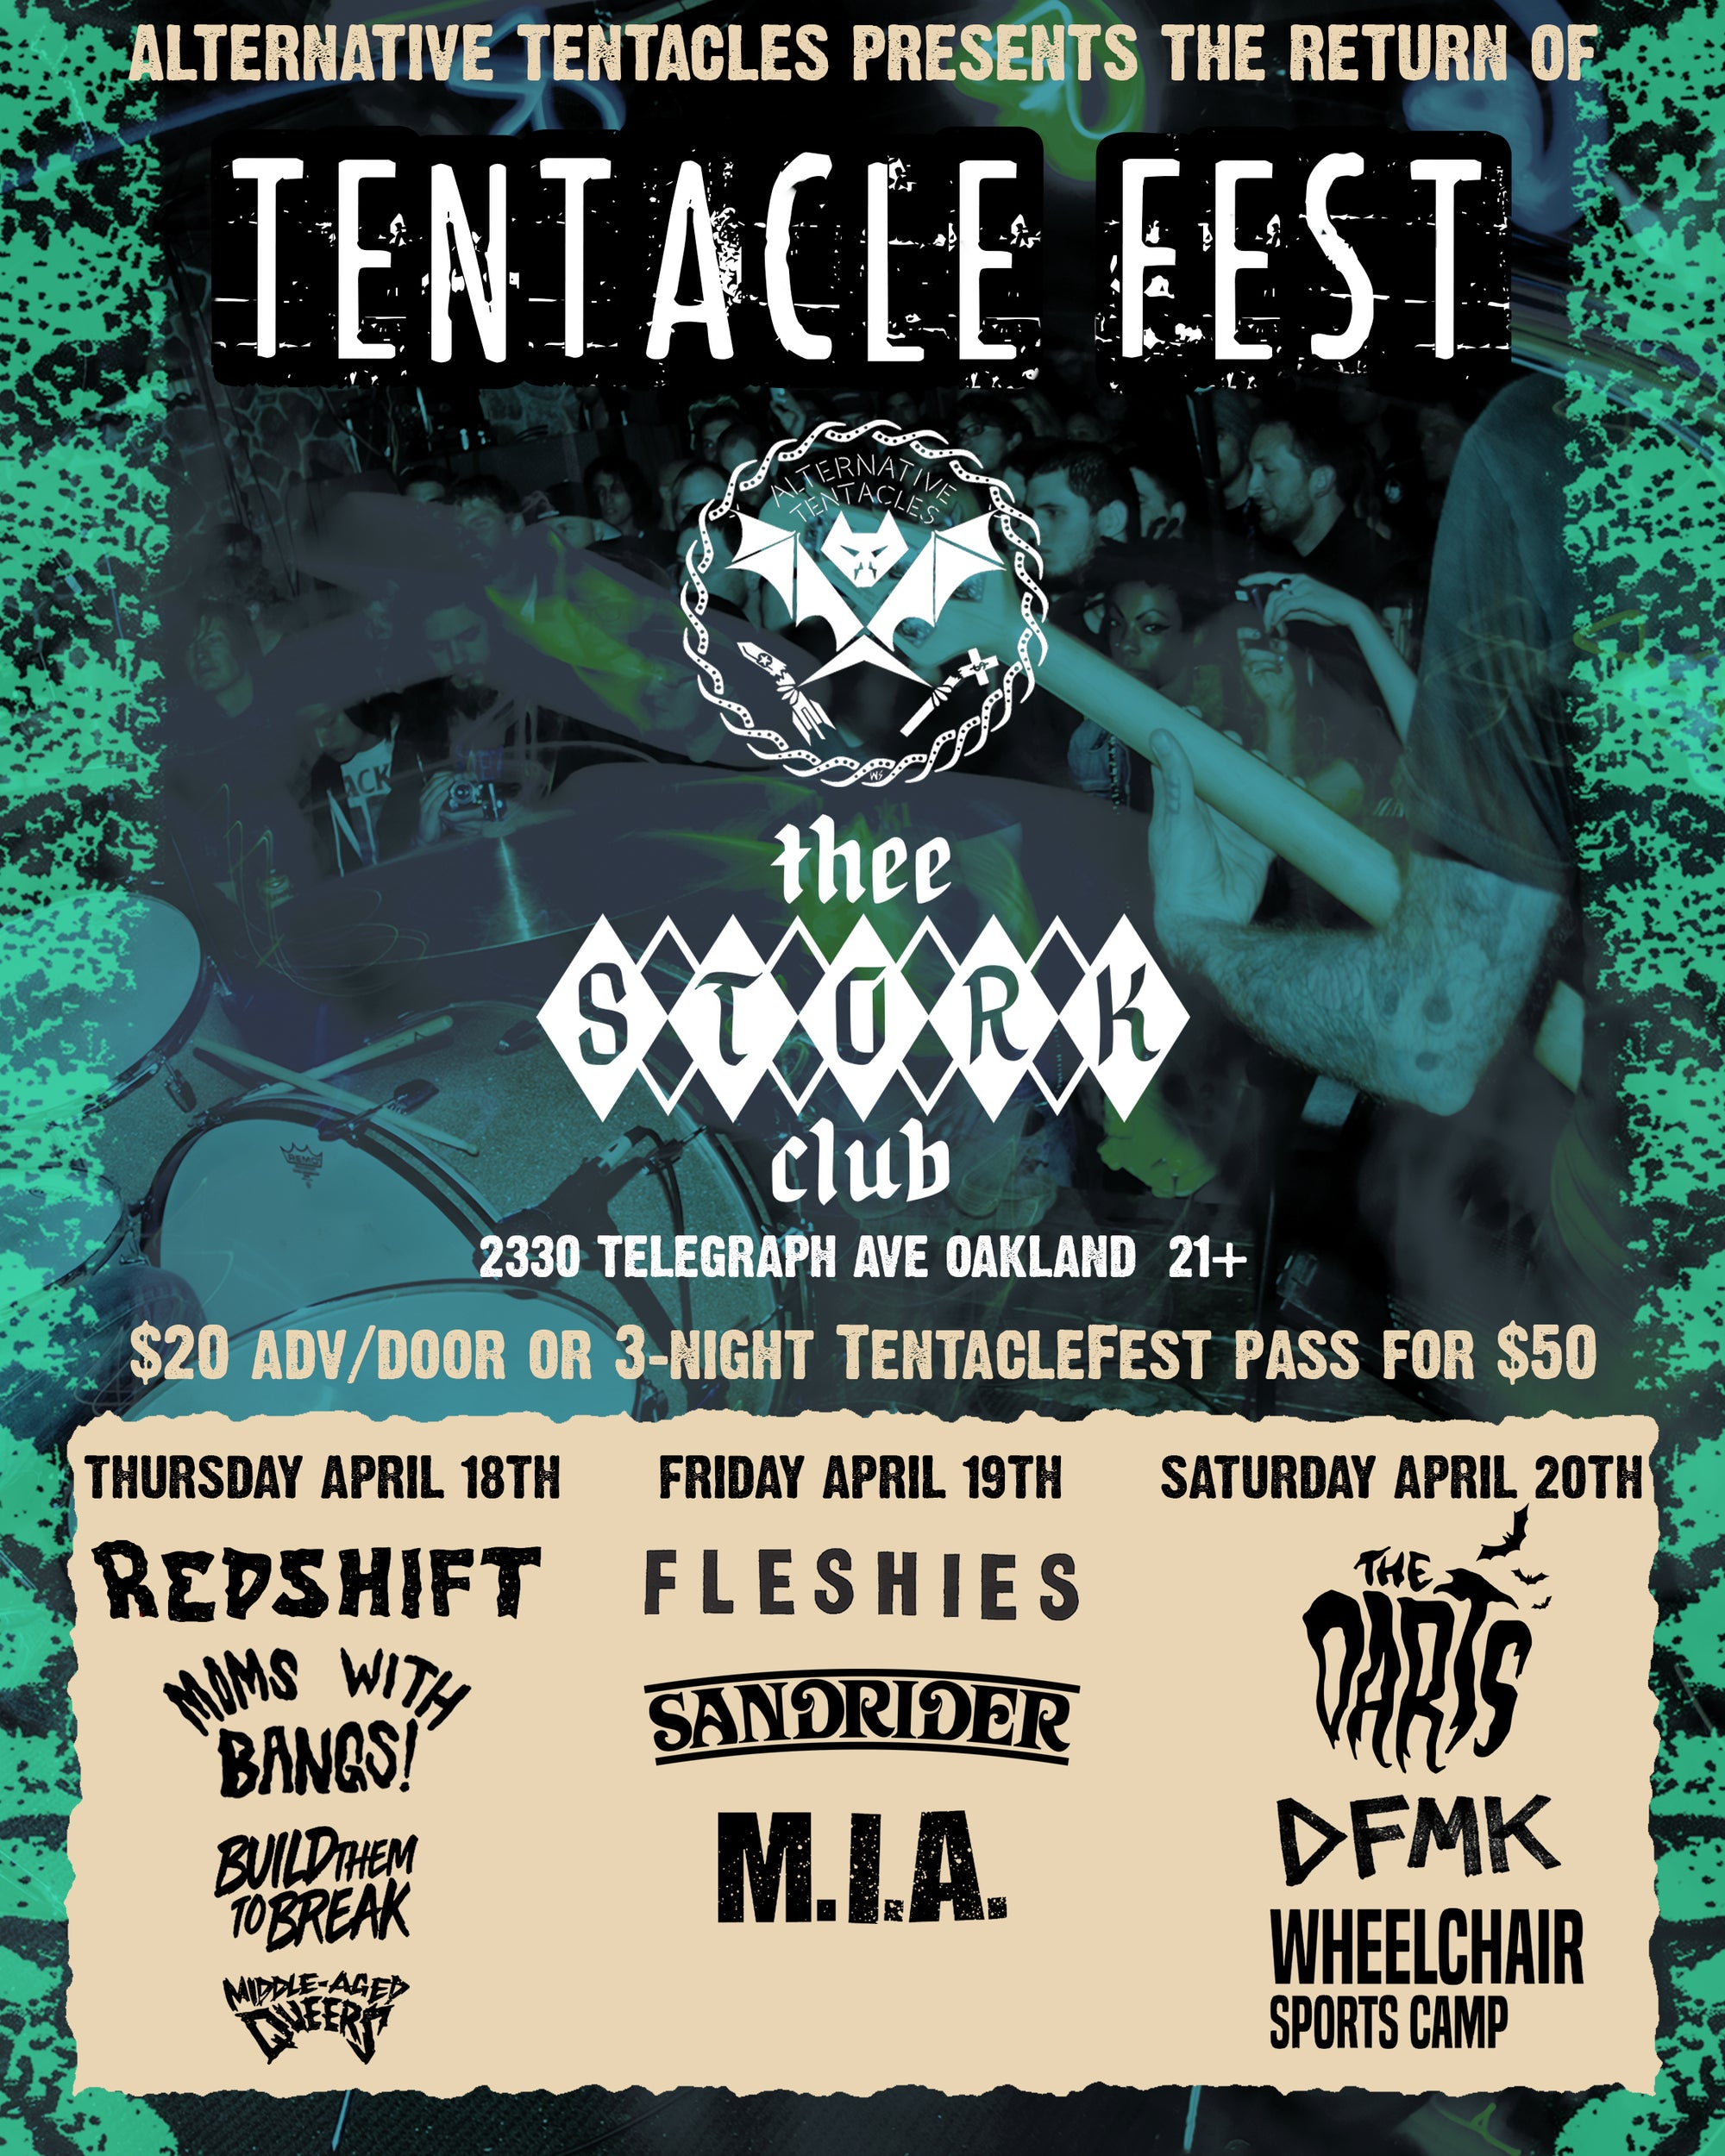 TENTACLEFEST FINAL LINE-UP ANNOUNCED!